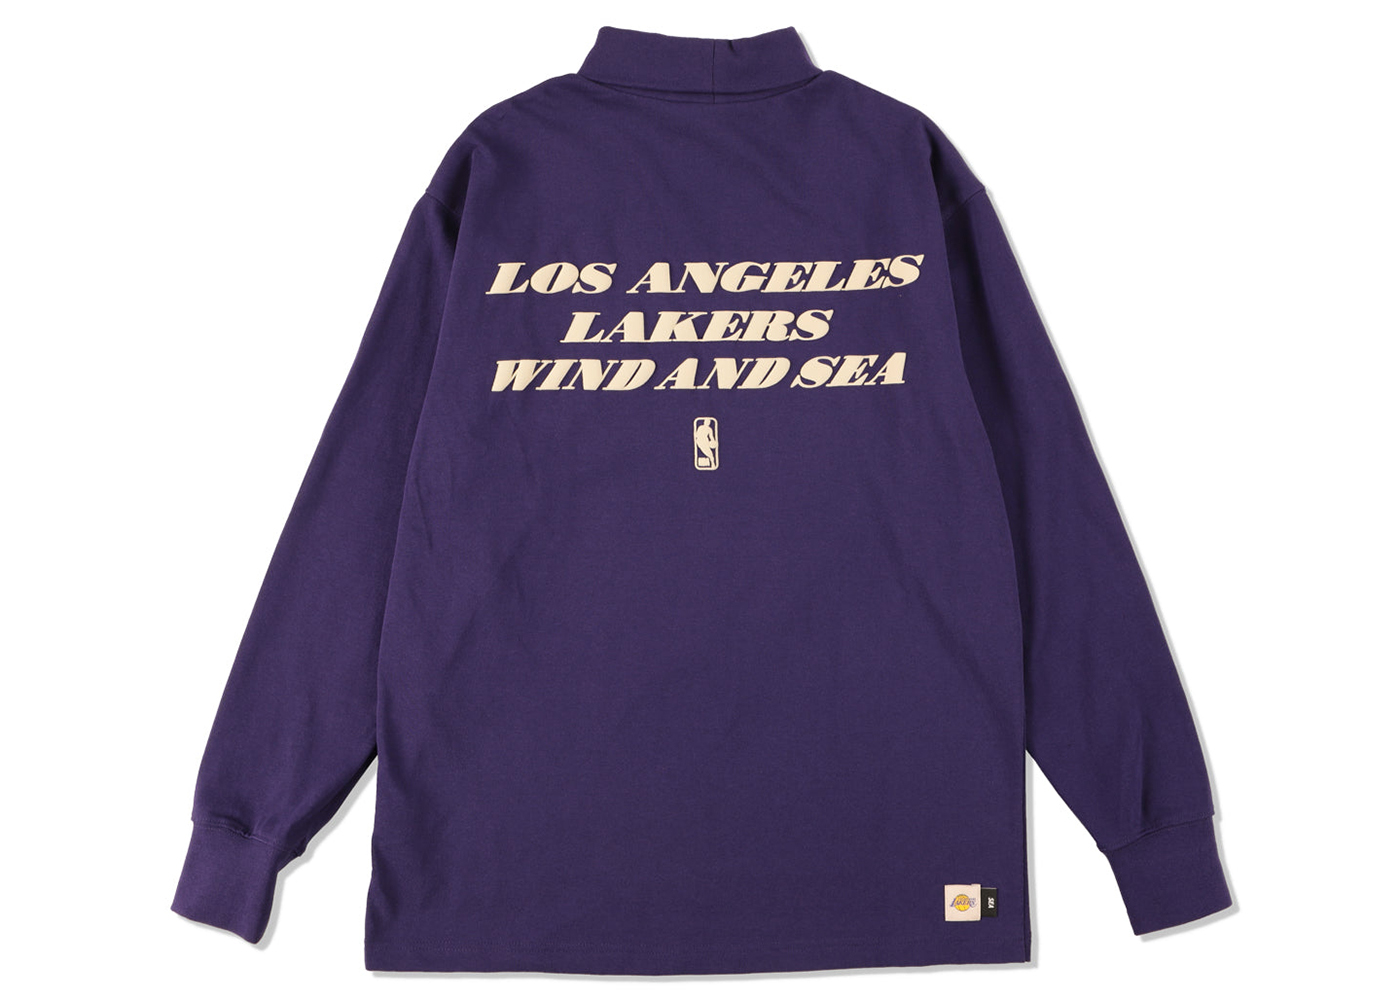 【XL】Wind and Sea x NBA  LAKERS Crew Neck